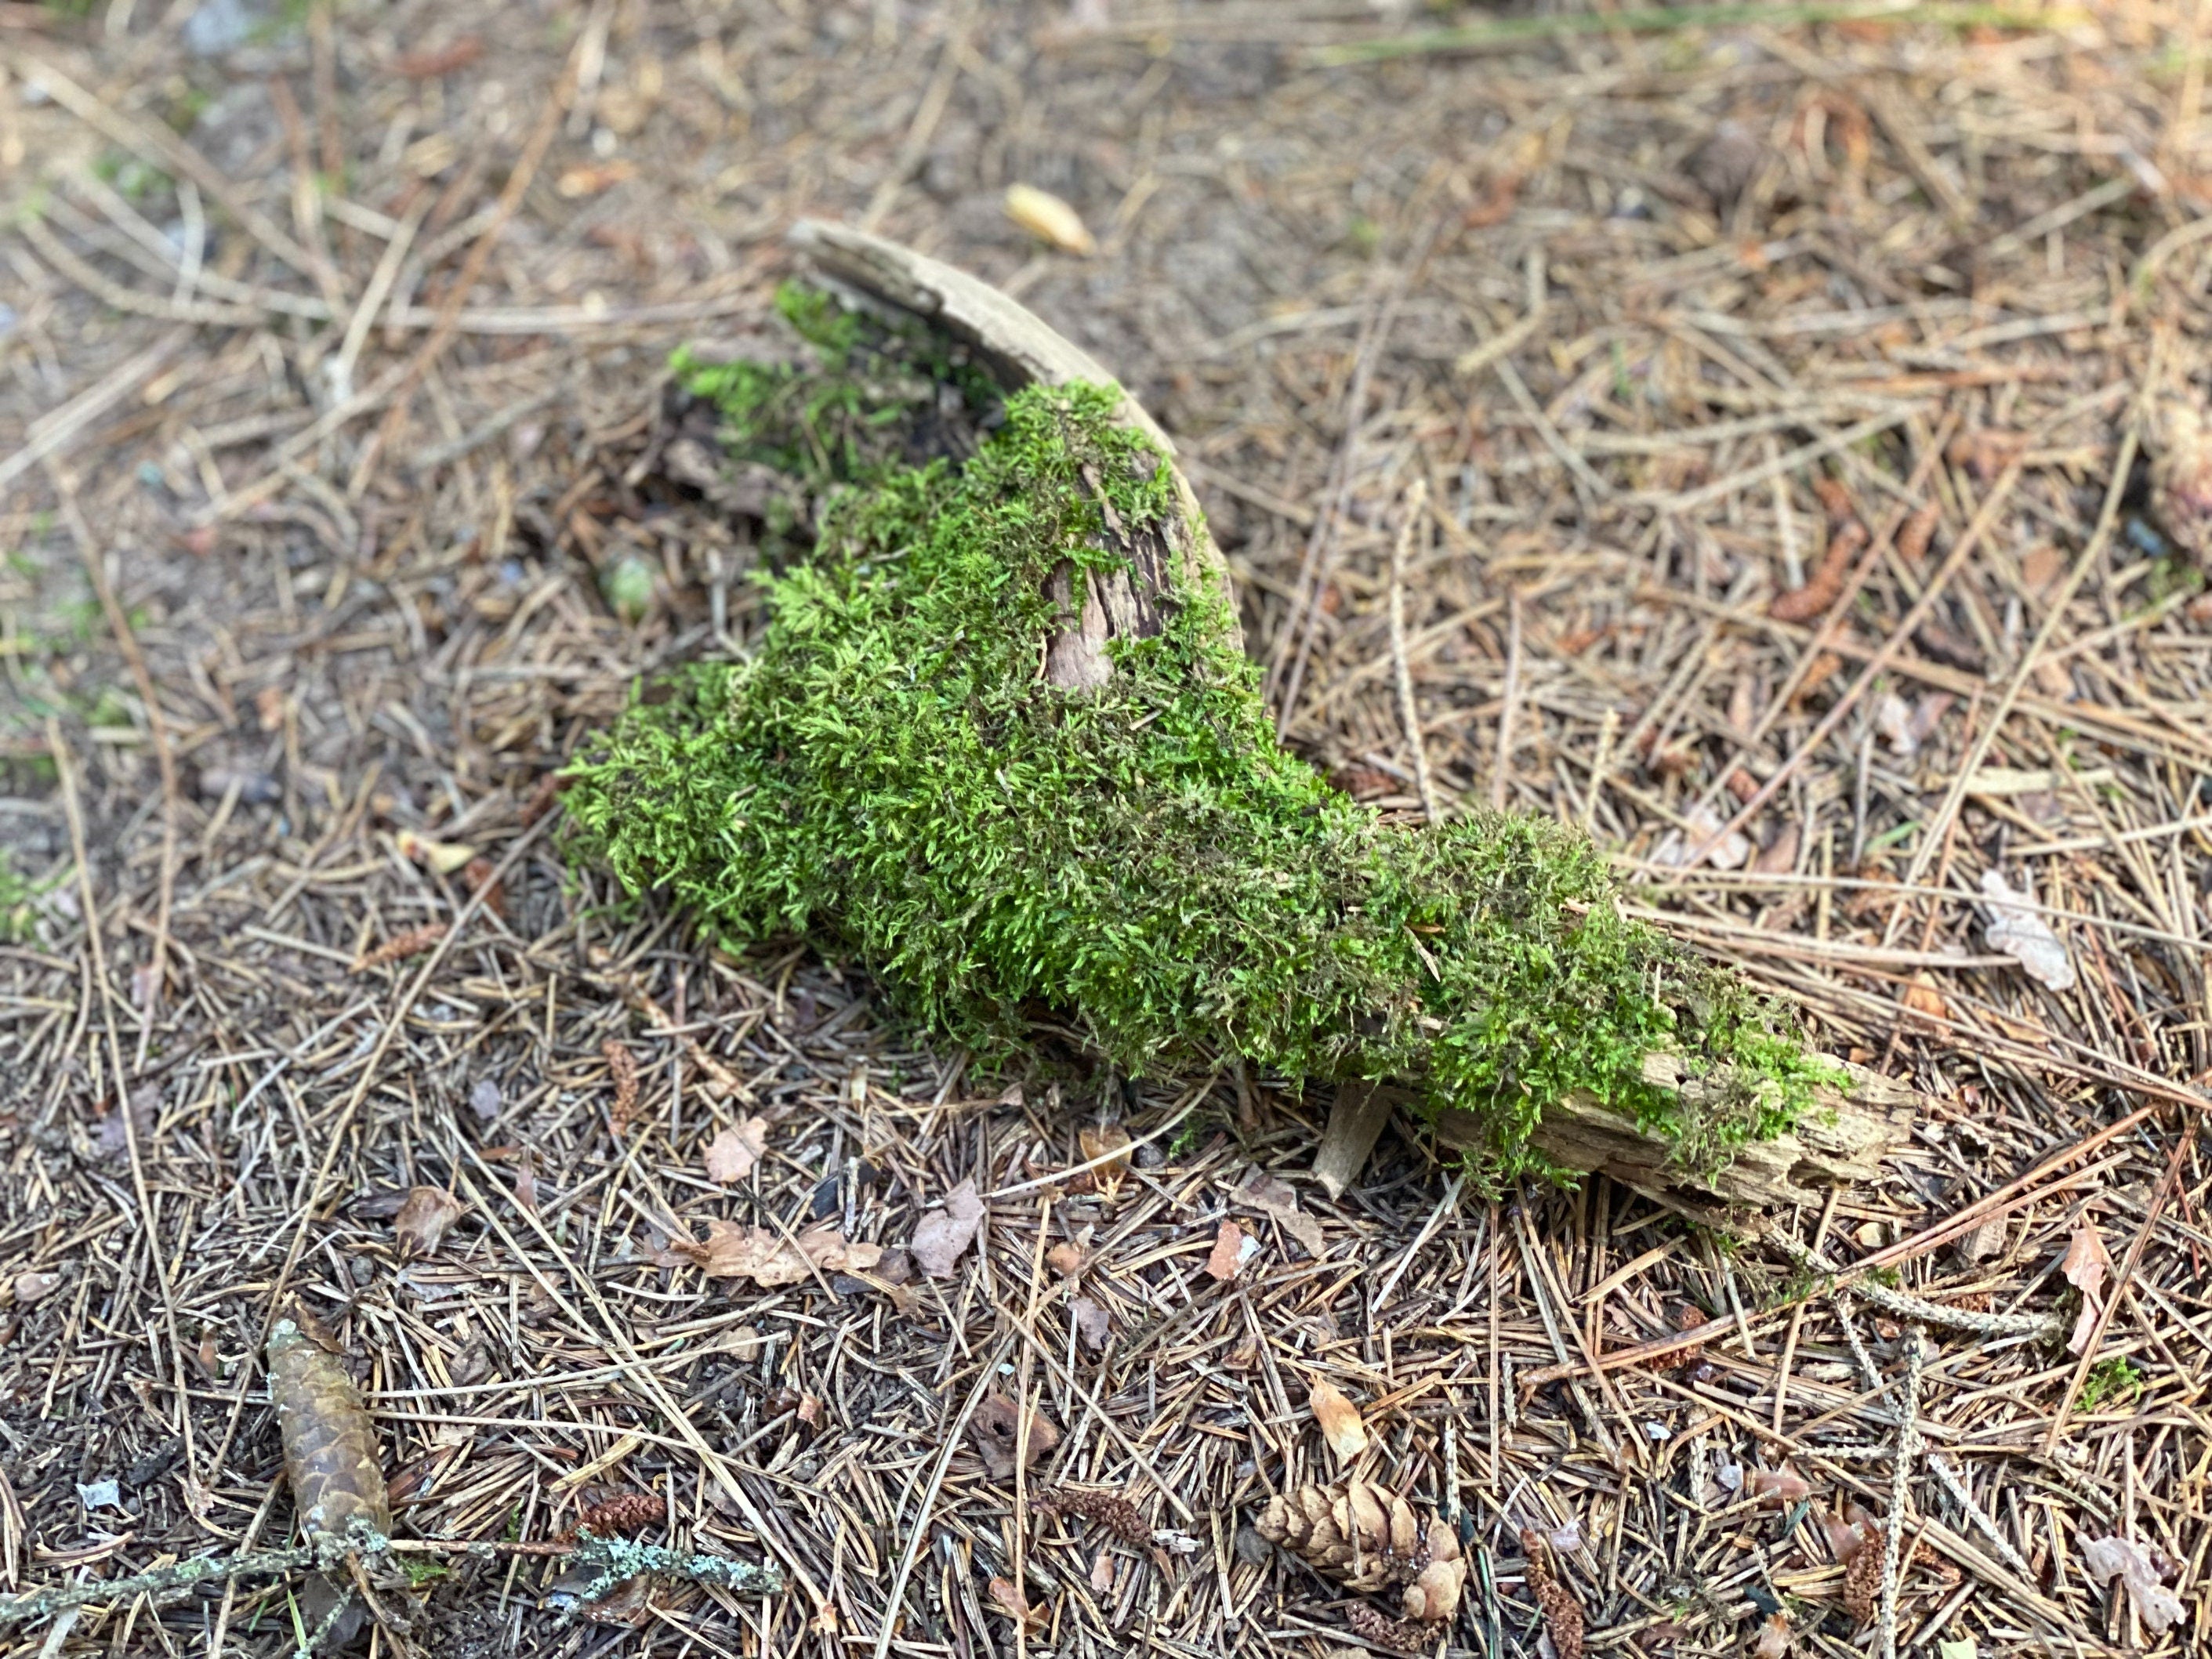 Moss Covered Log, Mossy Log, 9 Inches Long by 4 Inches Wide and 2 Inches High